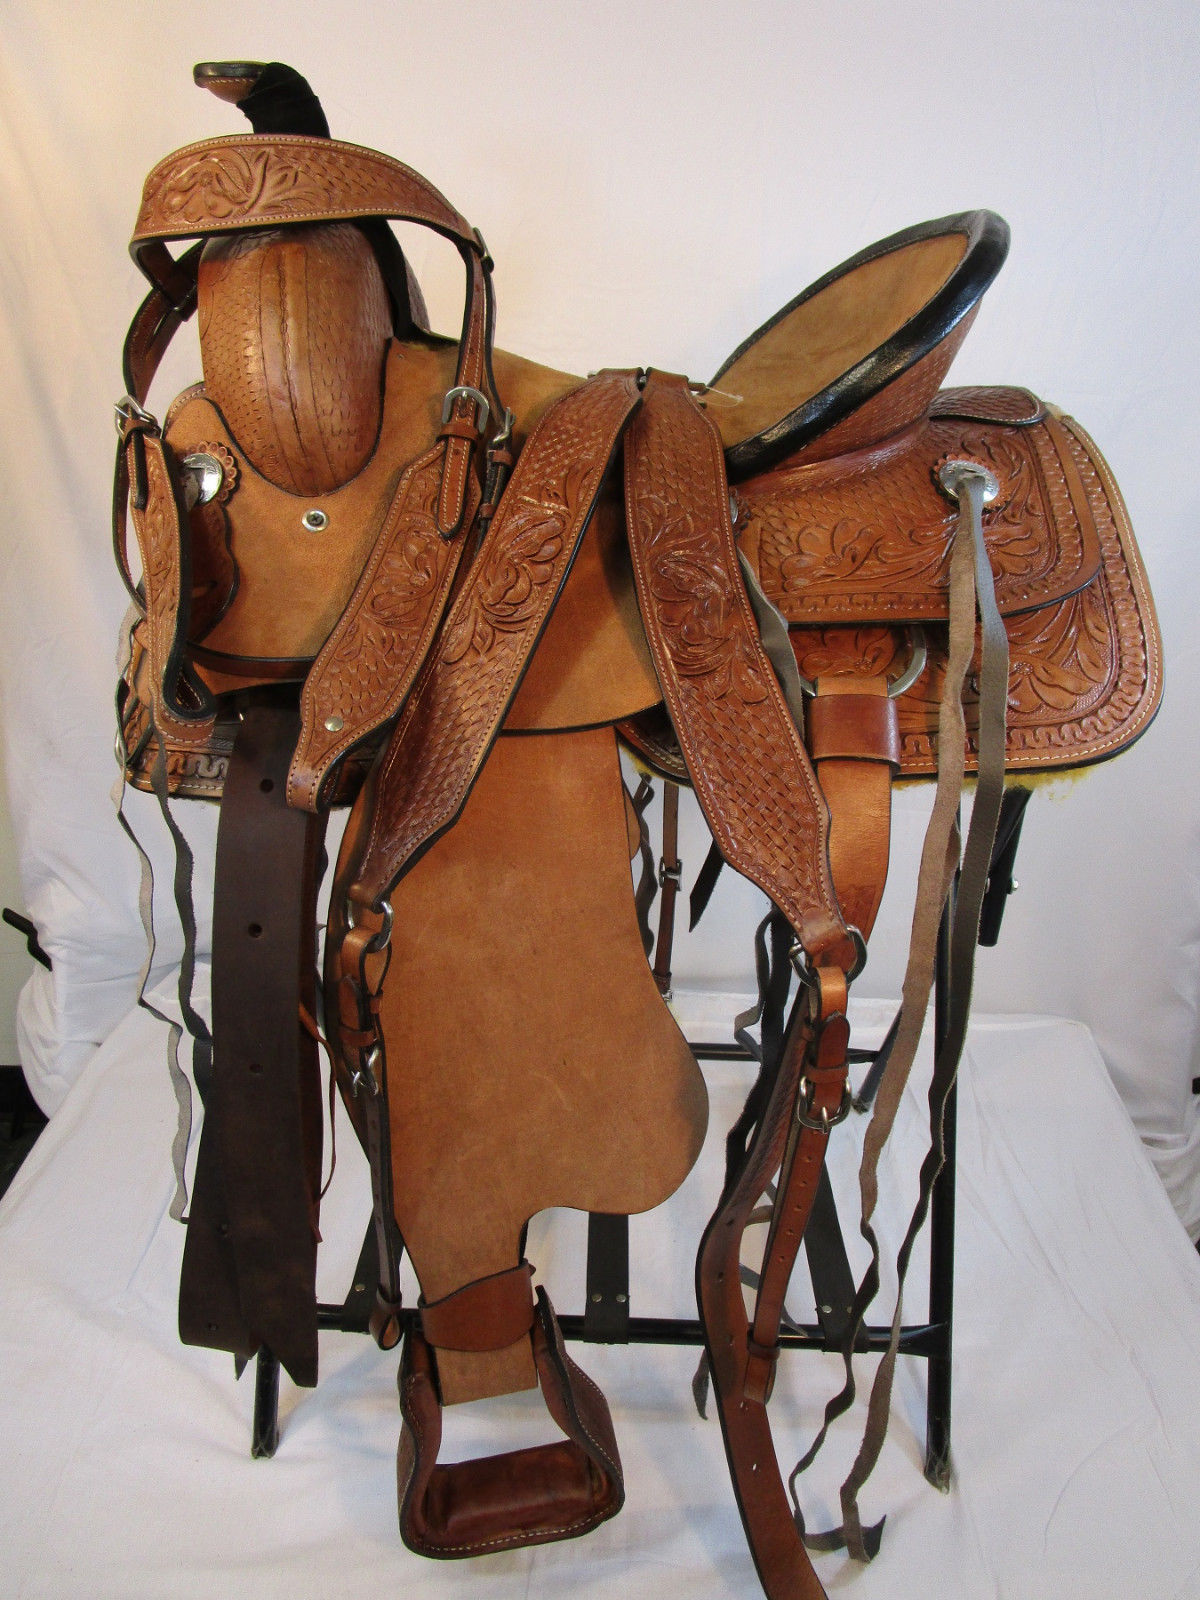 USED COWBOY WESTERN ROPING SADDLE HORSE RANCH FLORAL TOOLED LEATHER 15 16 17 18 